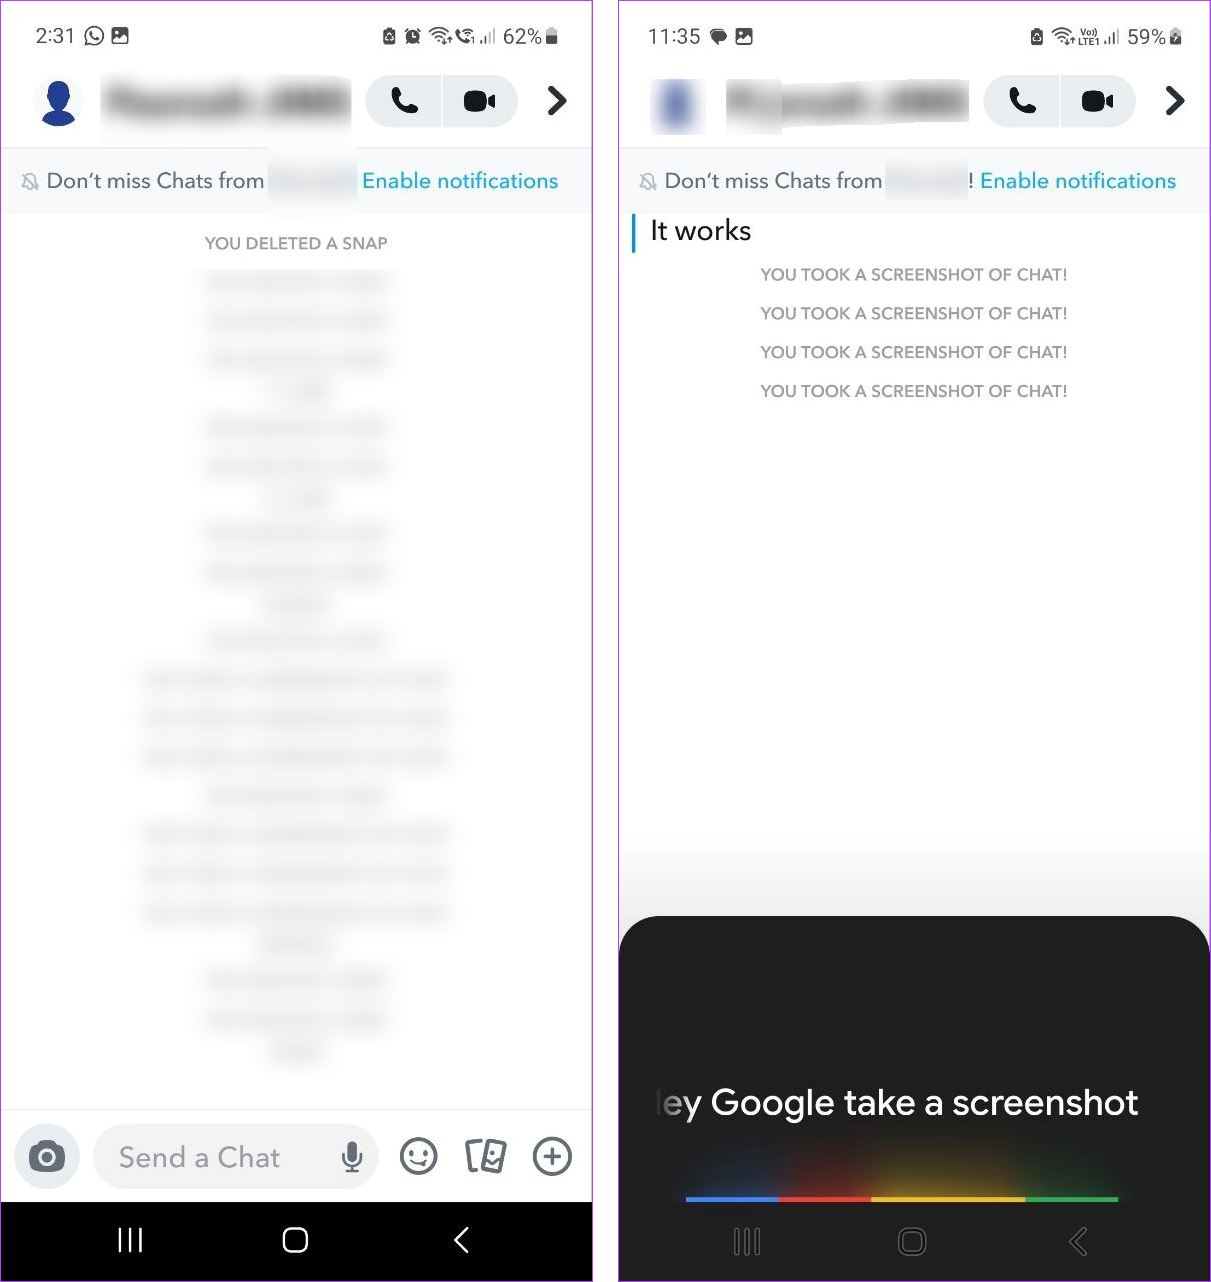 Use Google Assistant to take a screenshot